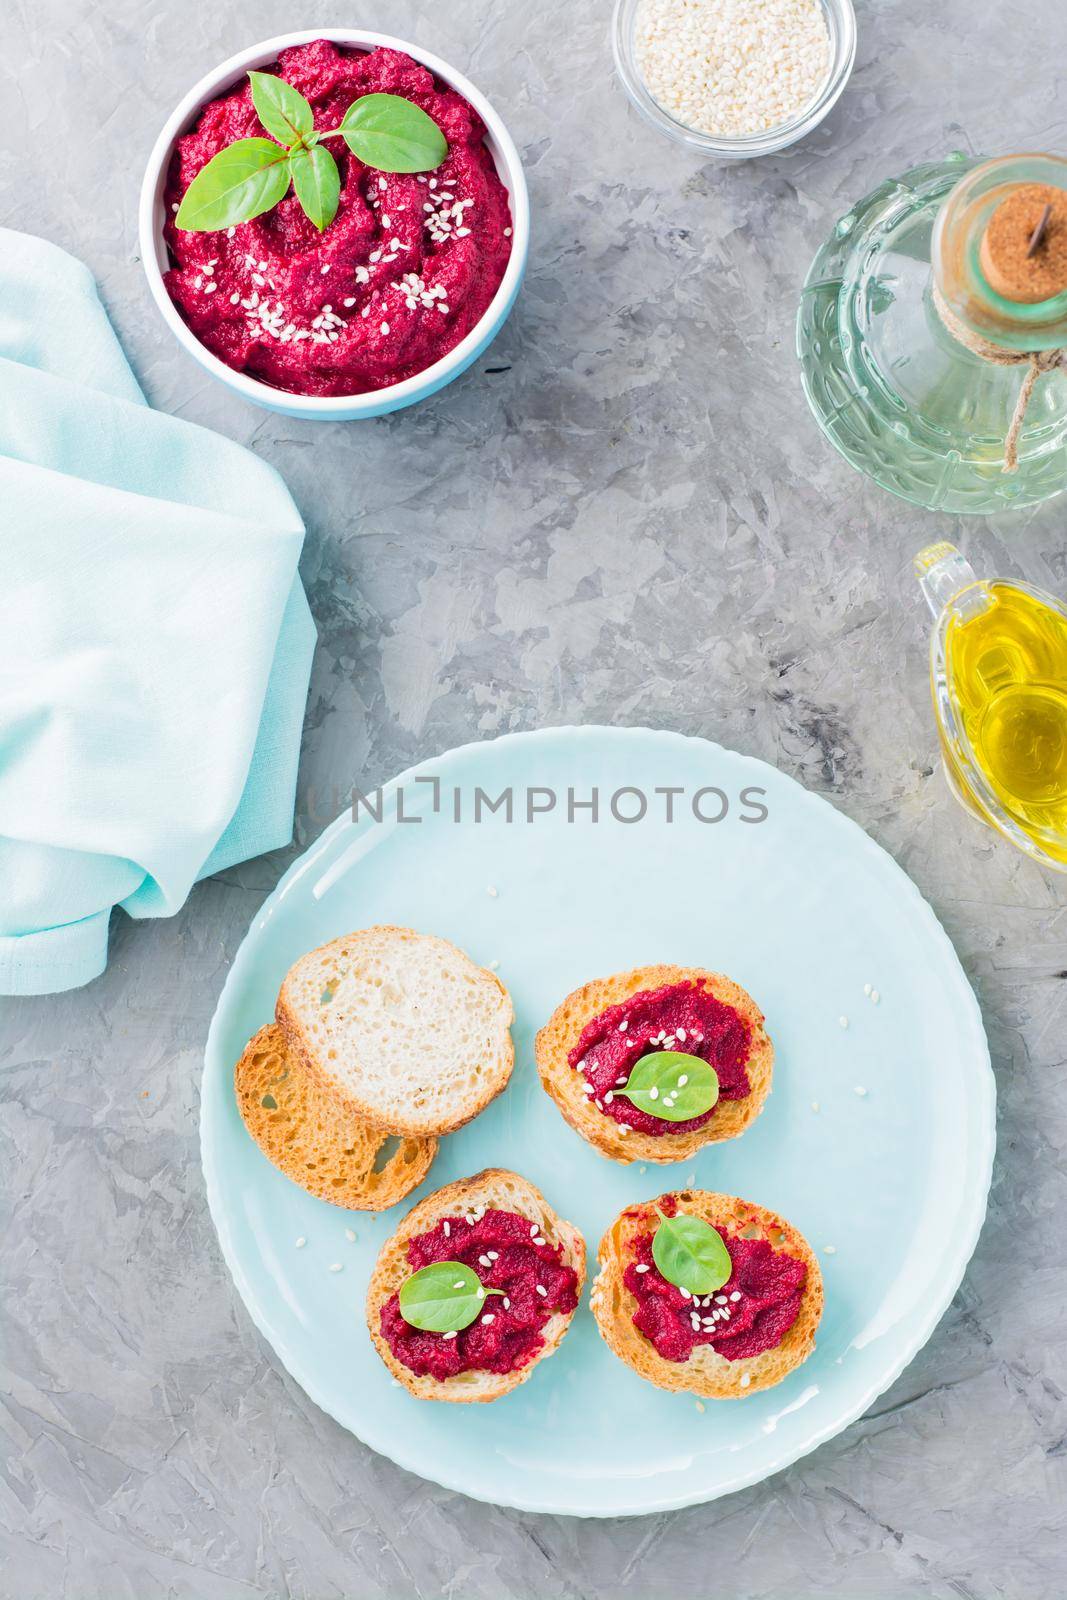 Homemade bruschetta with beetroot hummus on small baked baguette toast on a plate and a bowl of hummus on the table. Vertical and top view by Aleruana